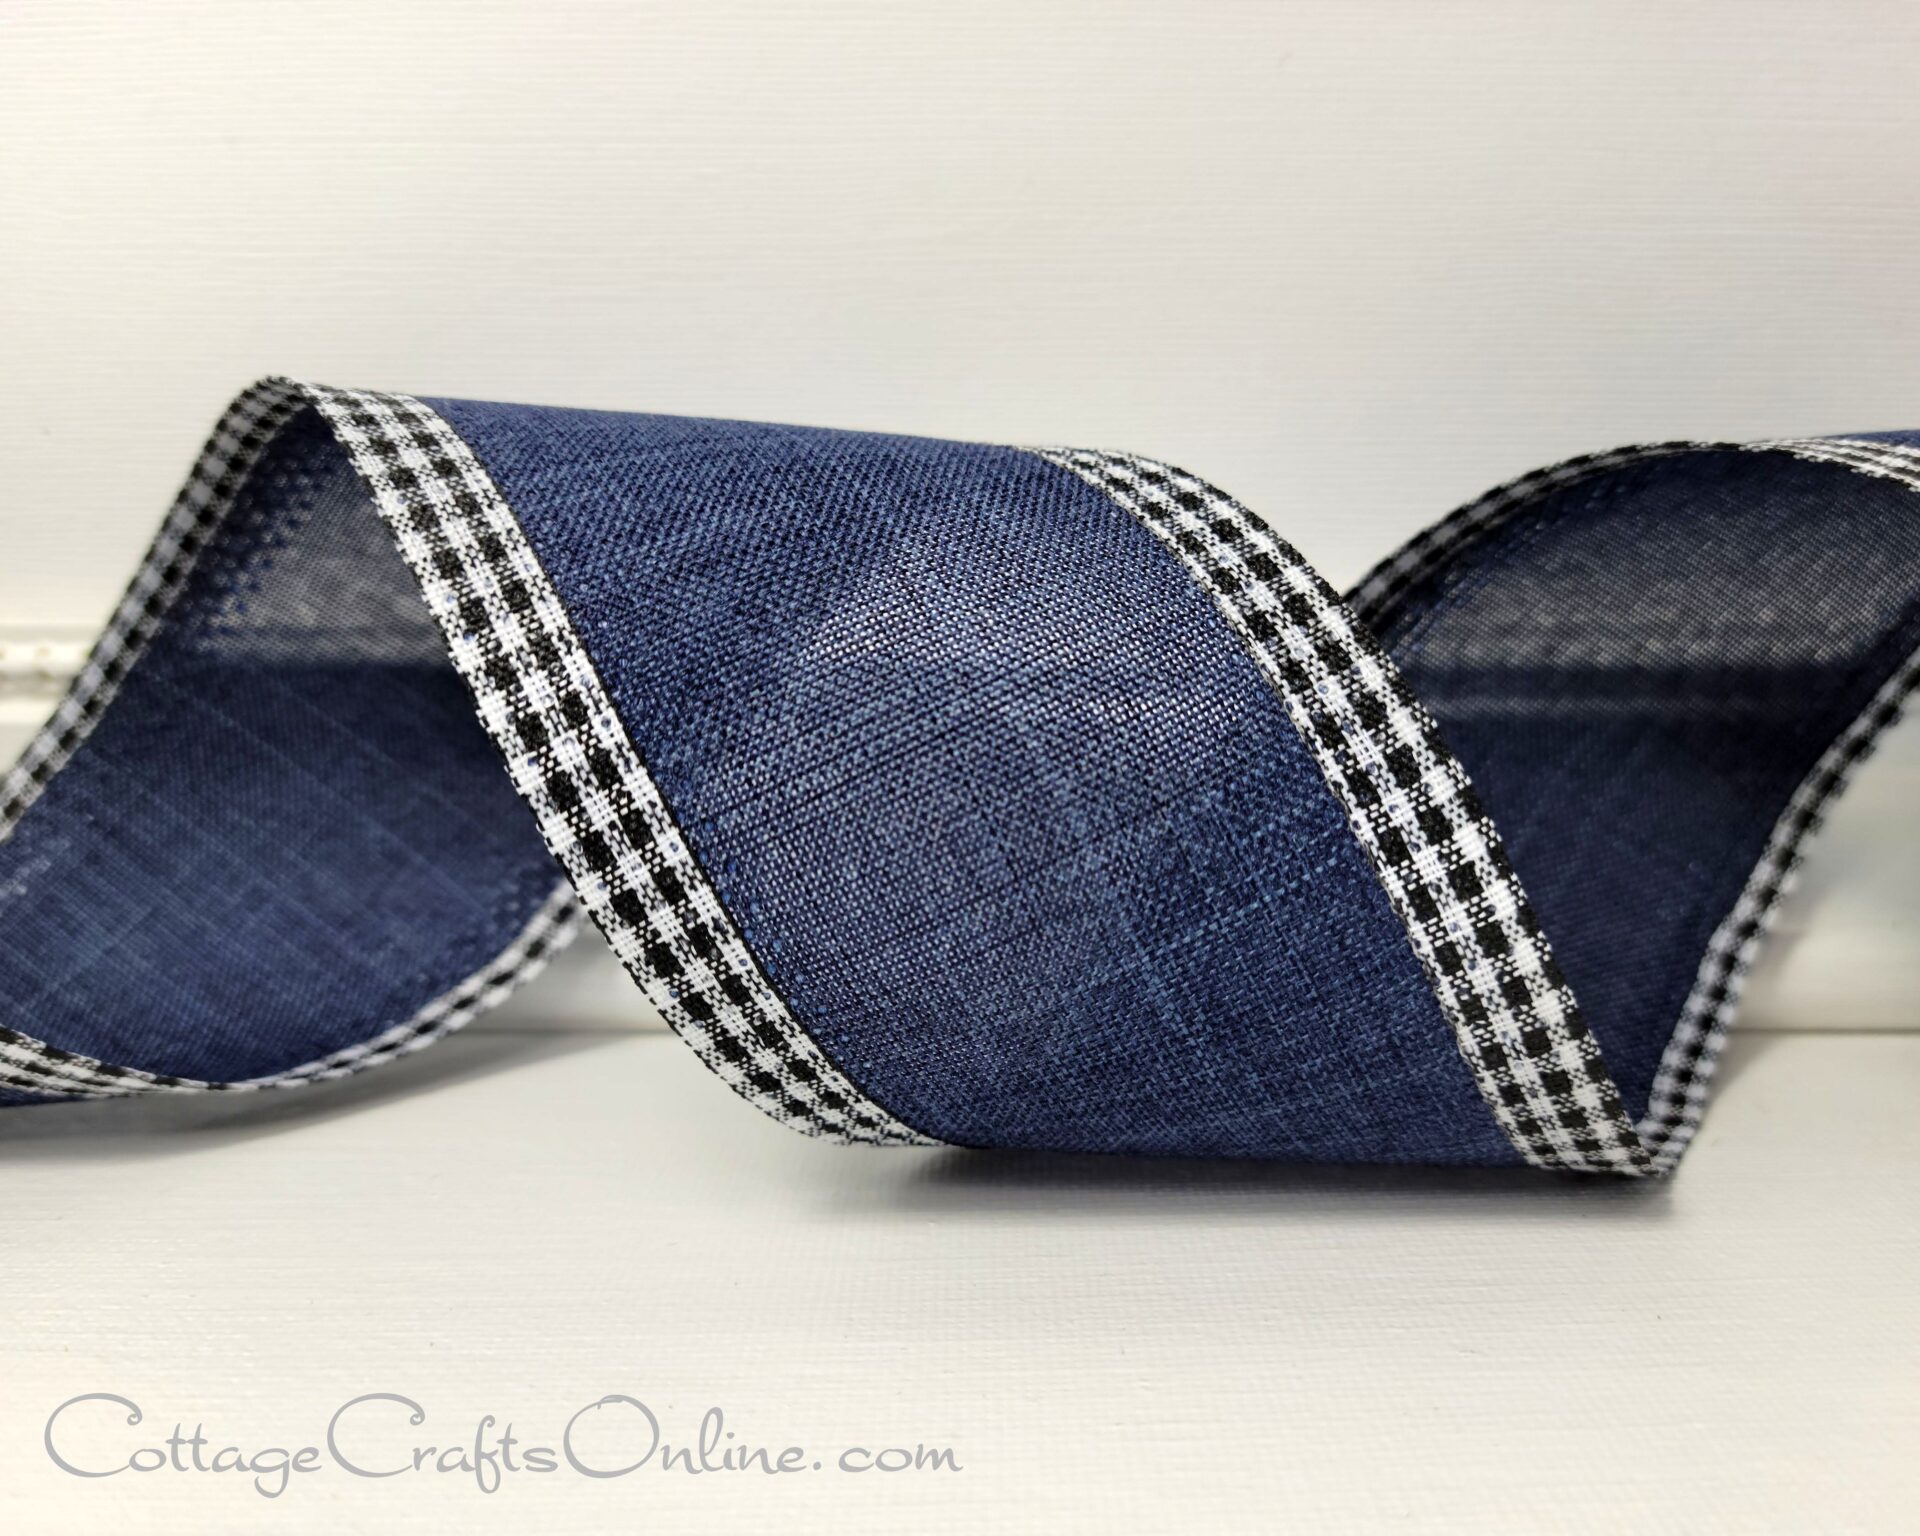 A blue ribbon with black and white gingham trim.